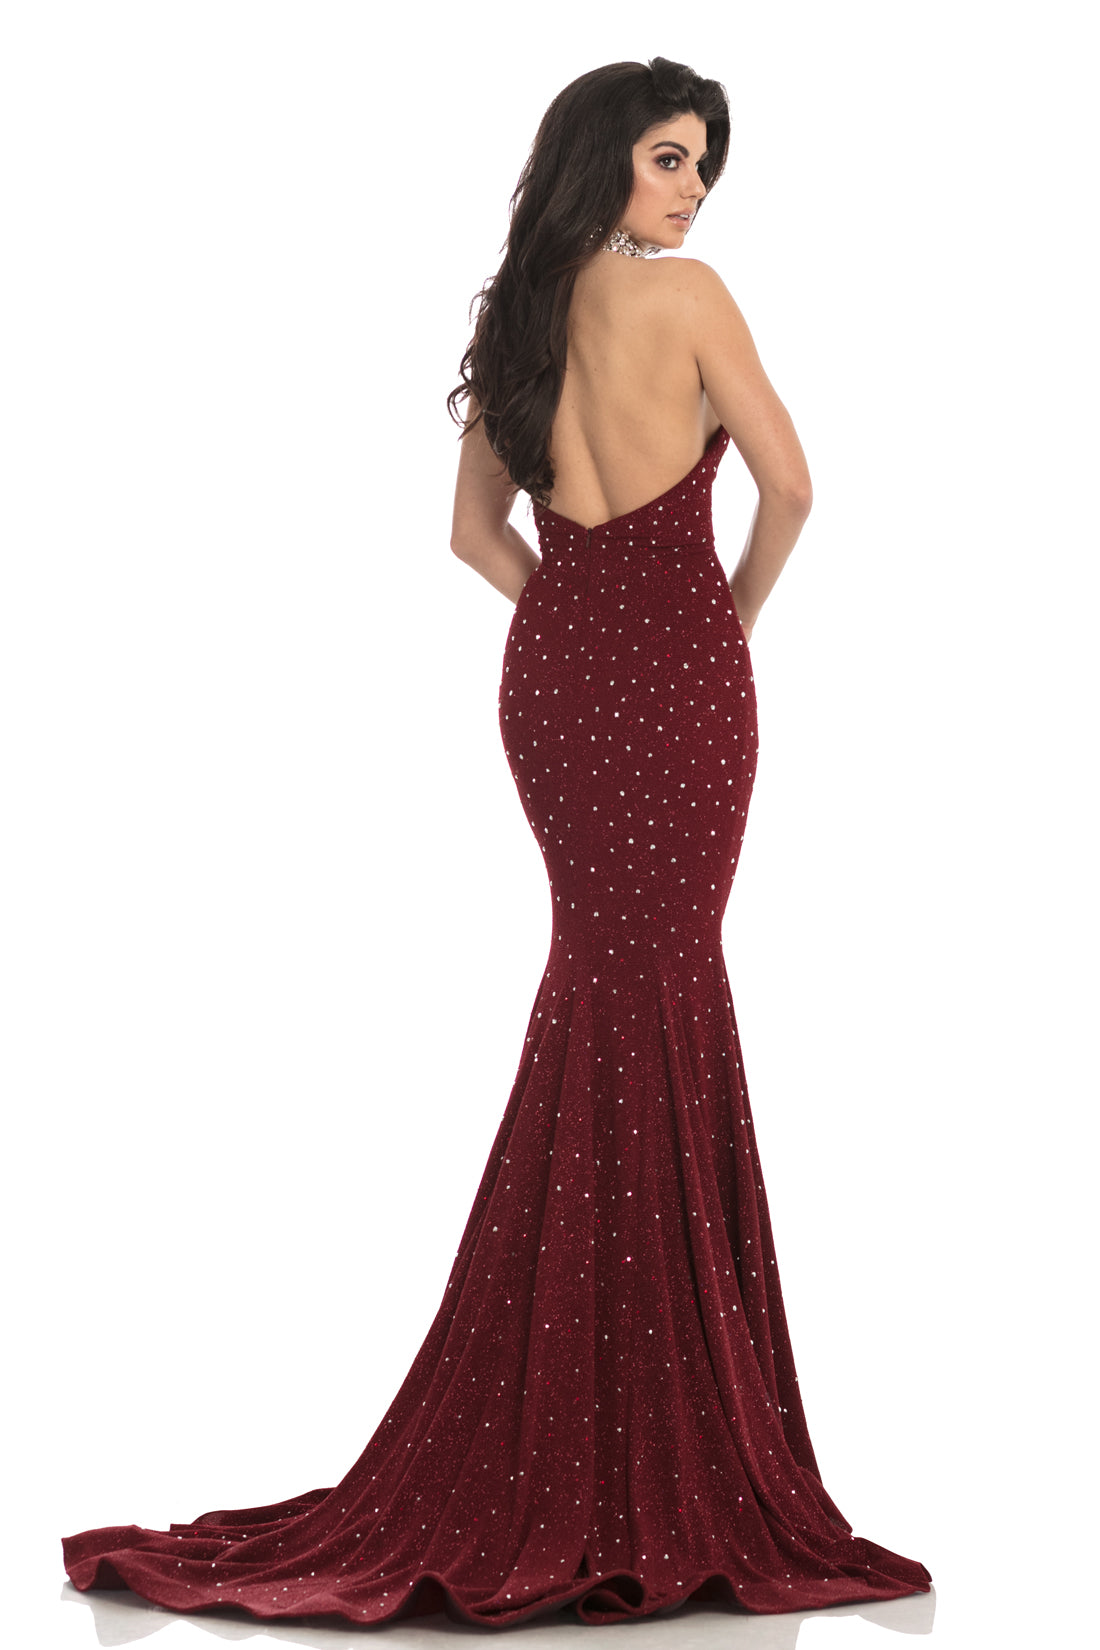 Johnathan Kayne 8235 is a choker neckline Prom Dress, Pageant Gown & formal evening Wear. CONVERTIBLE NECKLINE!  Red carpet glam, this choker neckline is encrusted with hand beaded crystals and stones rain down the silhouette of this glitter stretch knit halter mermaid gown. The neckline features an invisible zipper that allows you to choose a neckline.